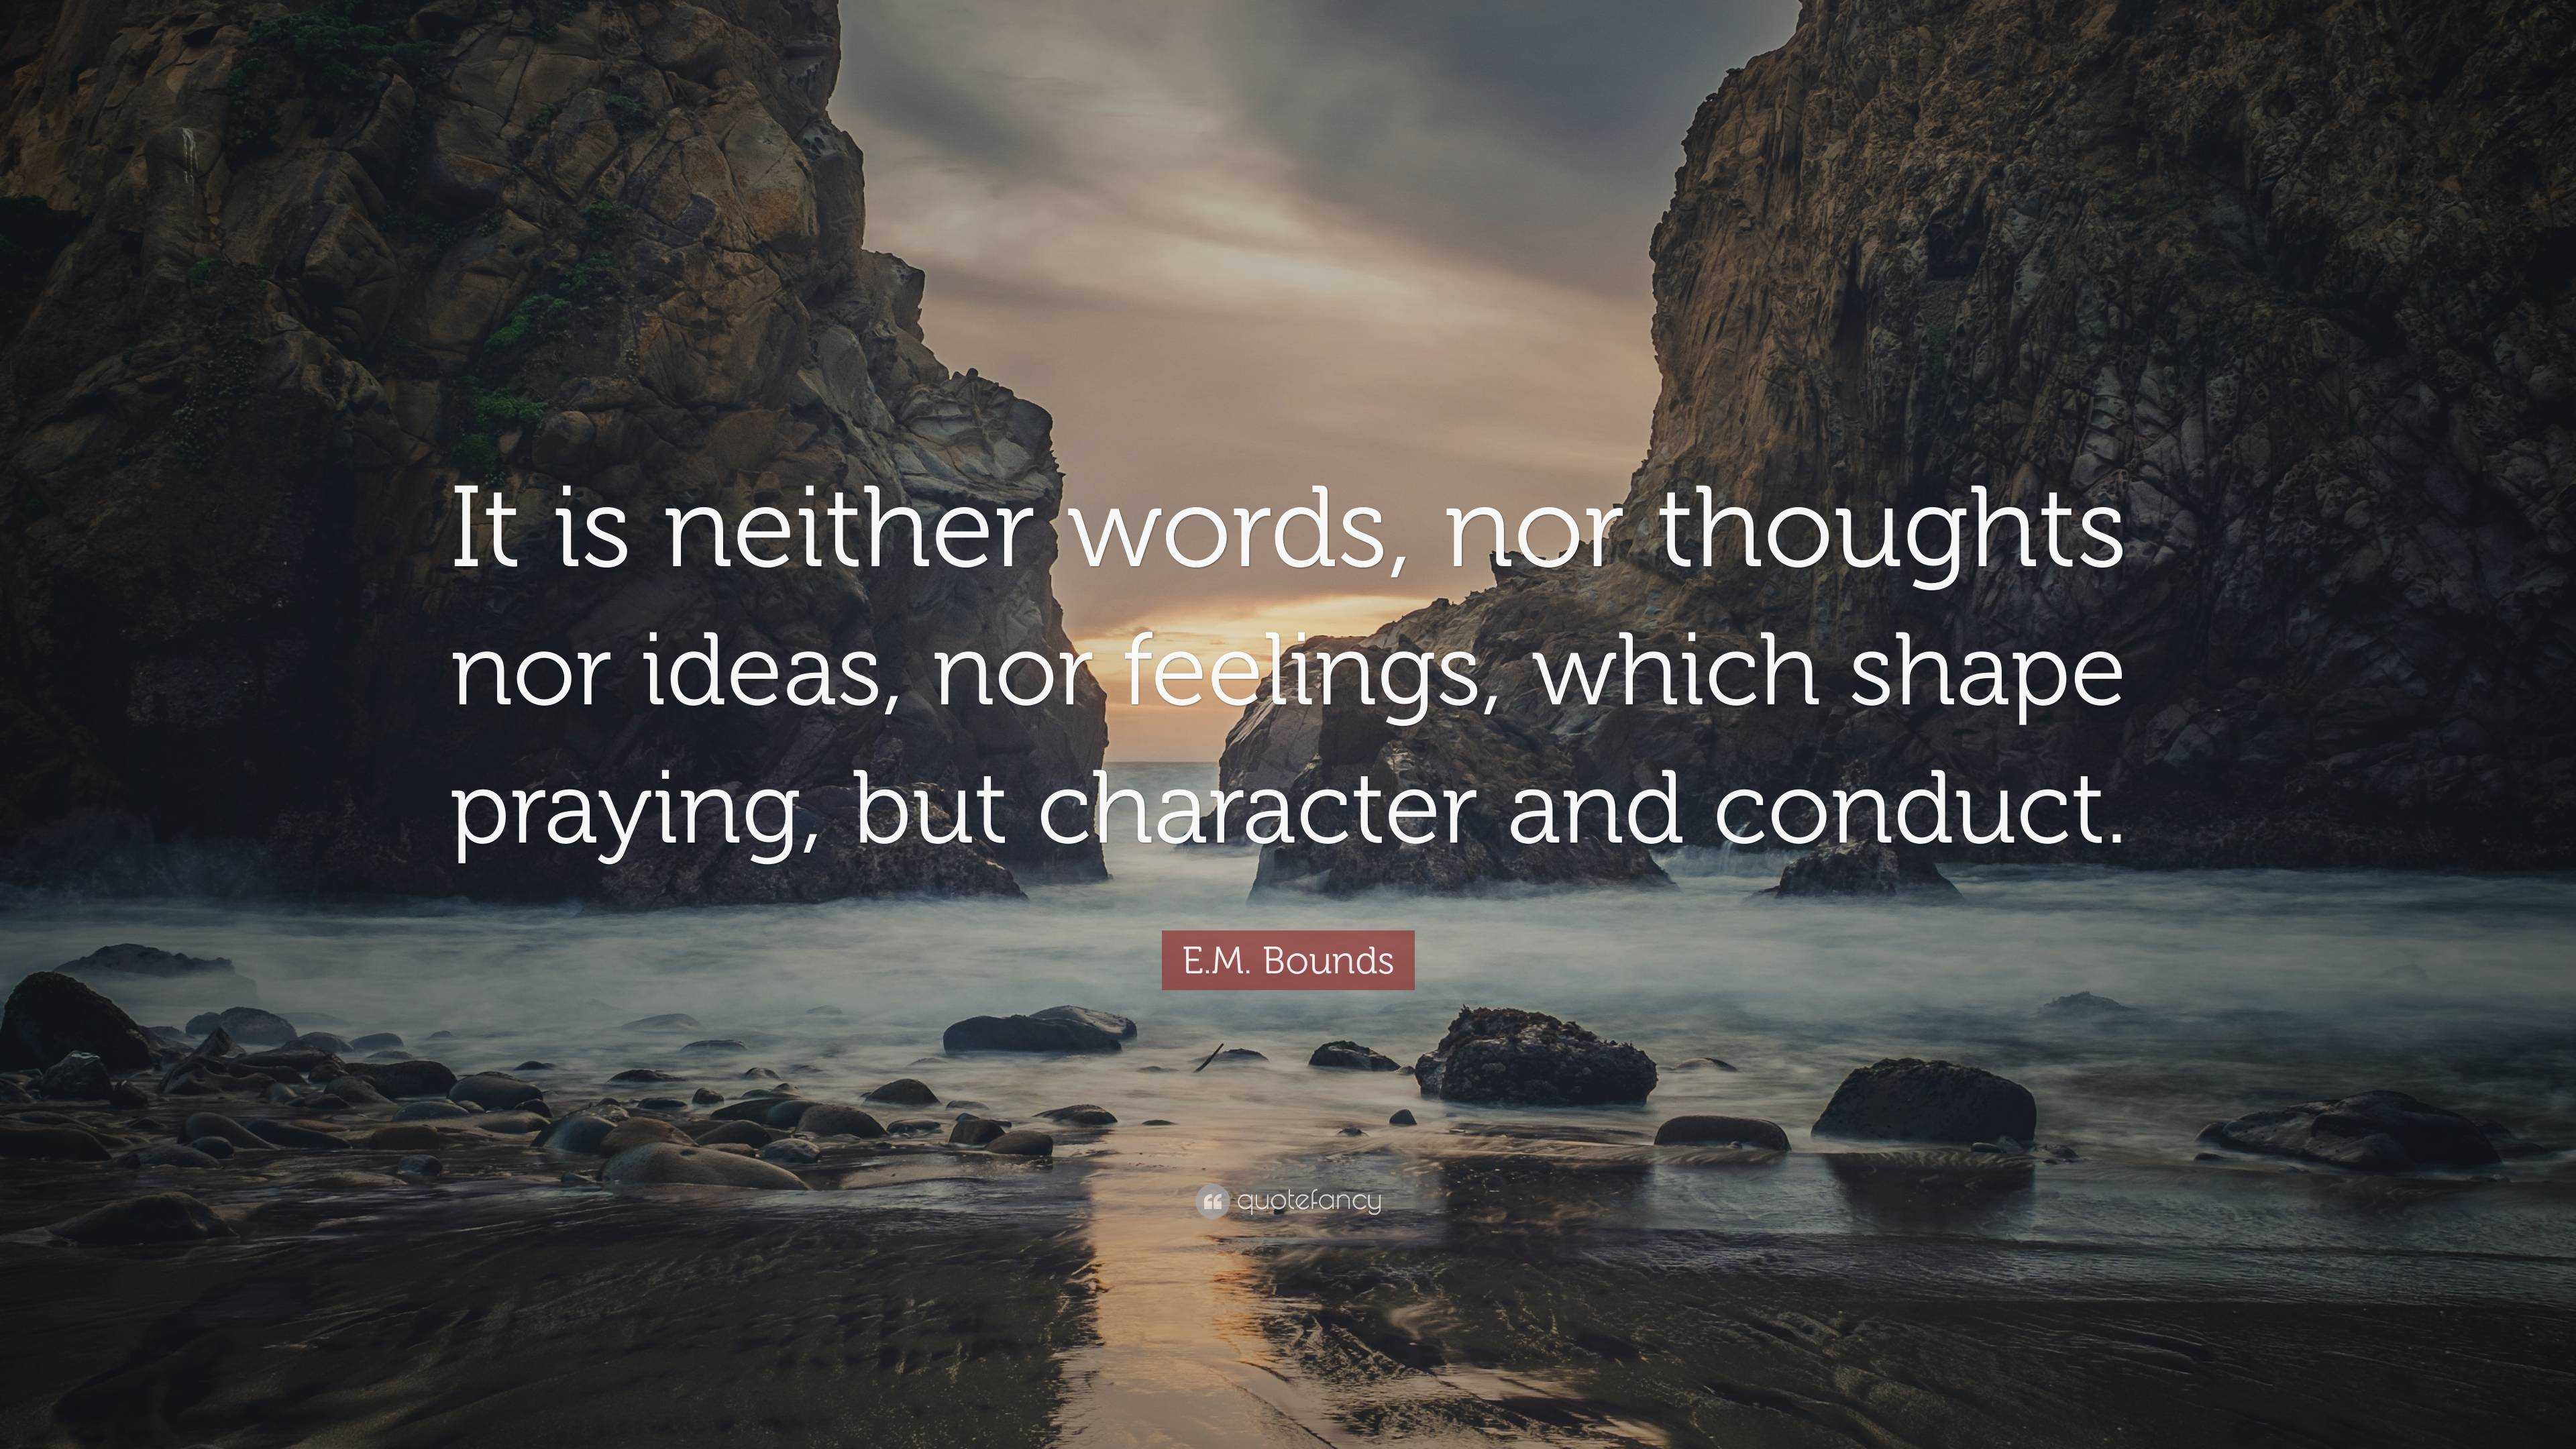 E.M. Bounds Quote: “It is neither words, nor thoughts nor ideas, nor ...